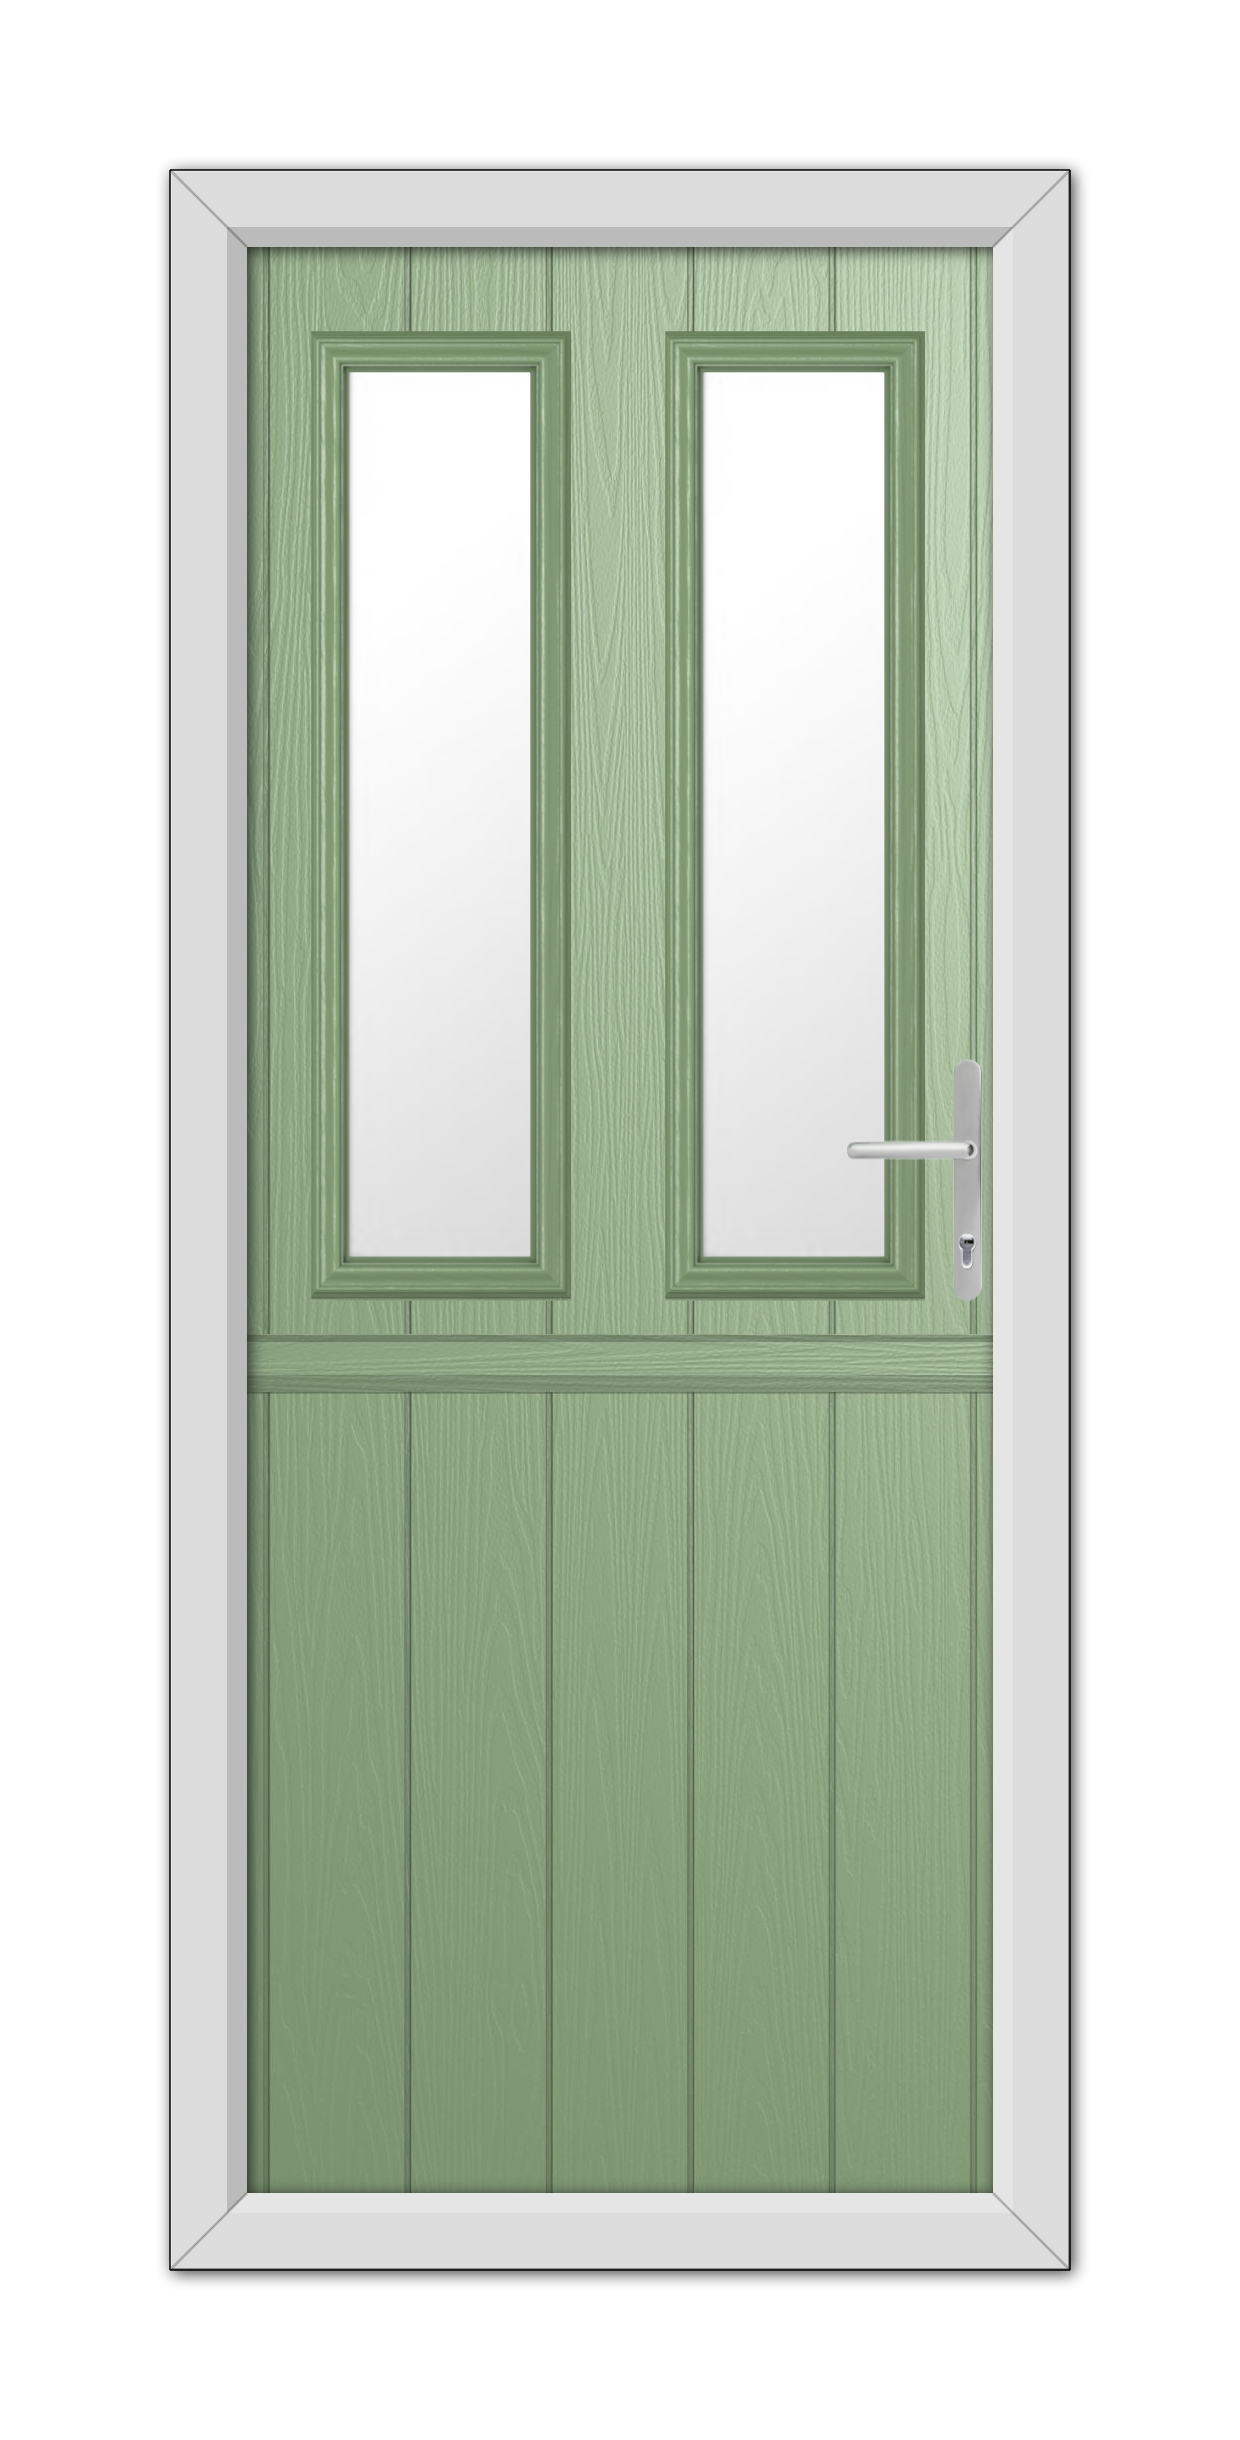 A Chartwell Green Wellington Stable Composite Door 48mm Timber Core with glass windows on the upper half and solid panels on the bottom, framed in a white casing, viewed from the front.